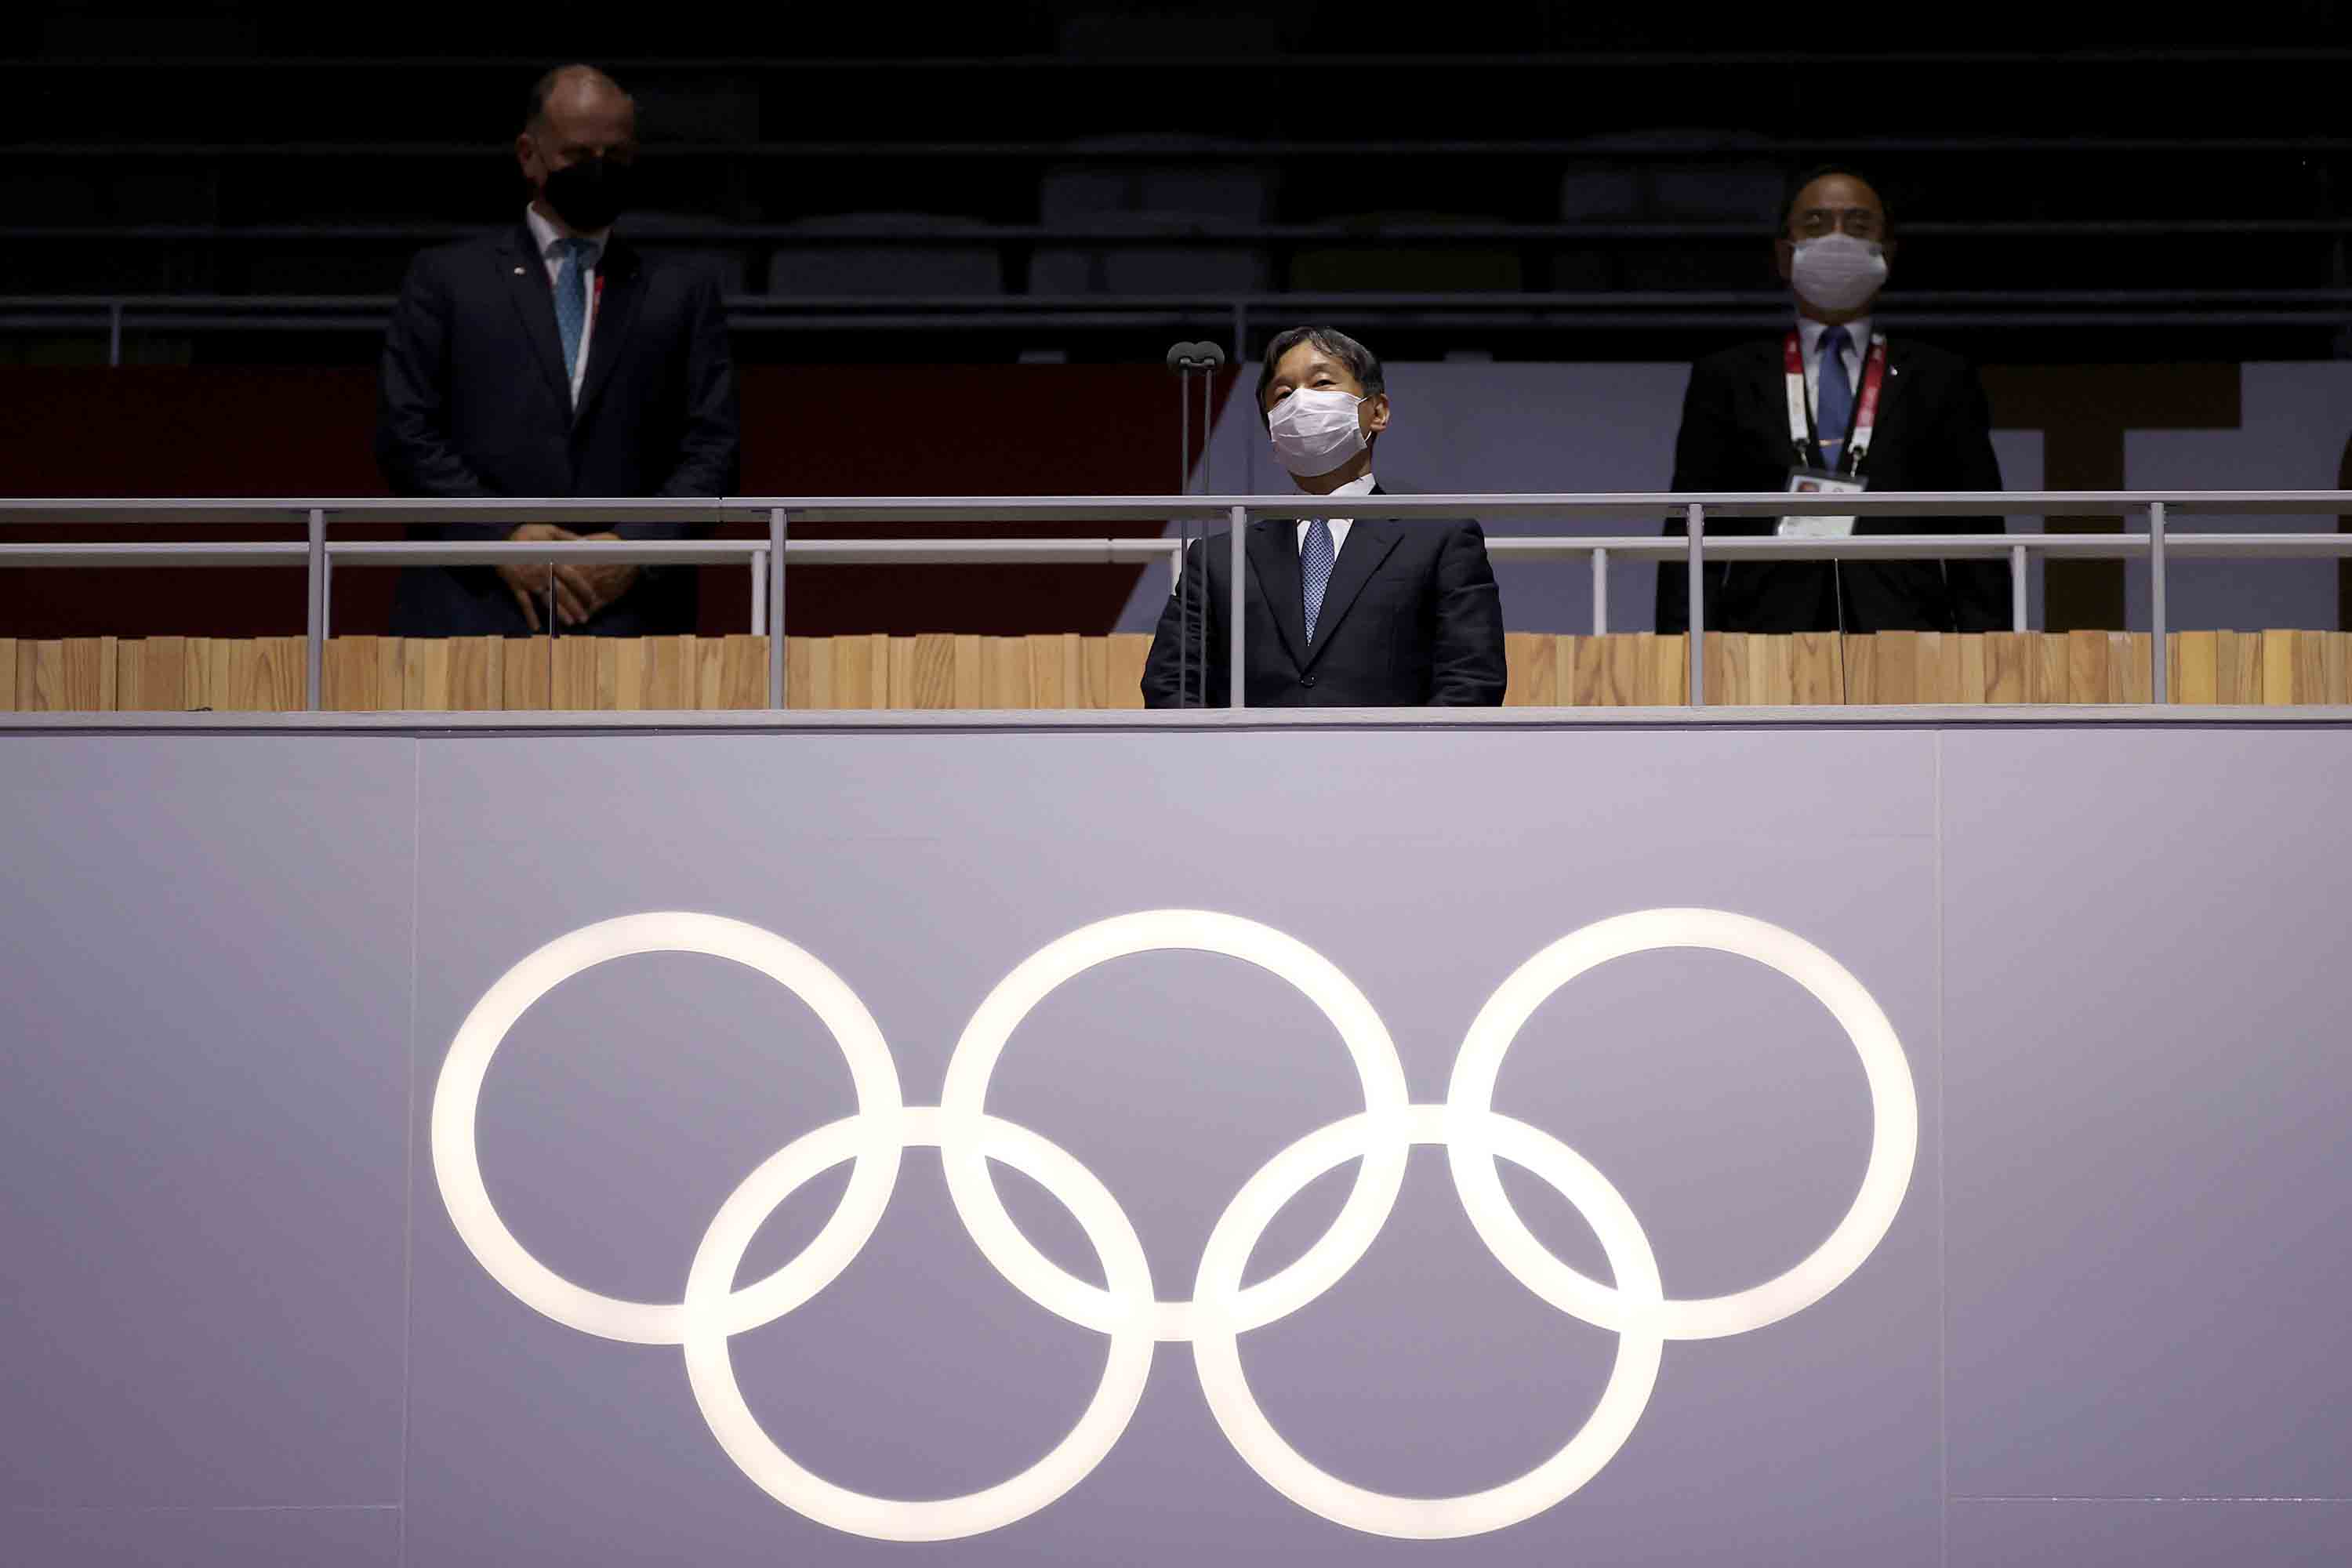 Japan's Emperor Naruhito declares the Olympic Games open.